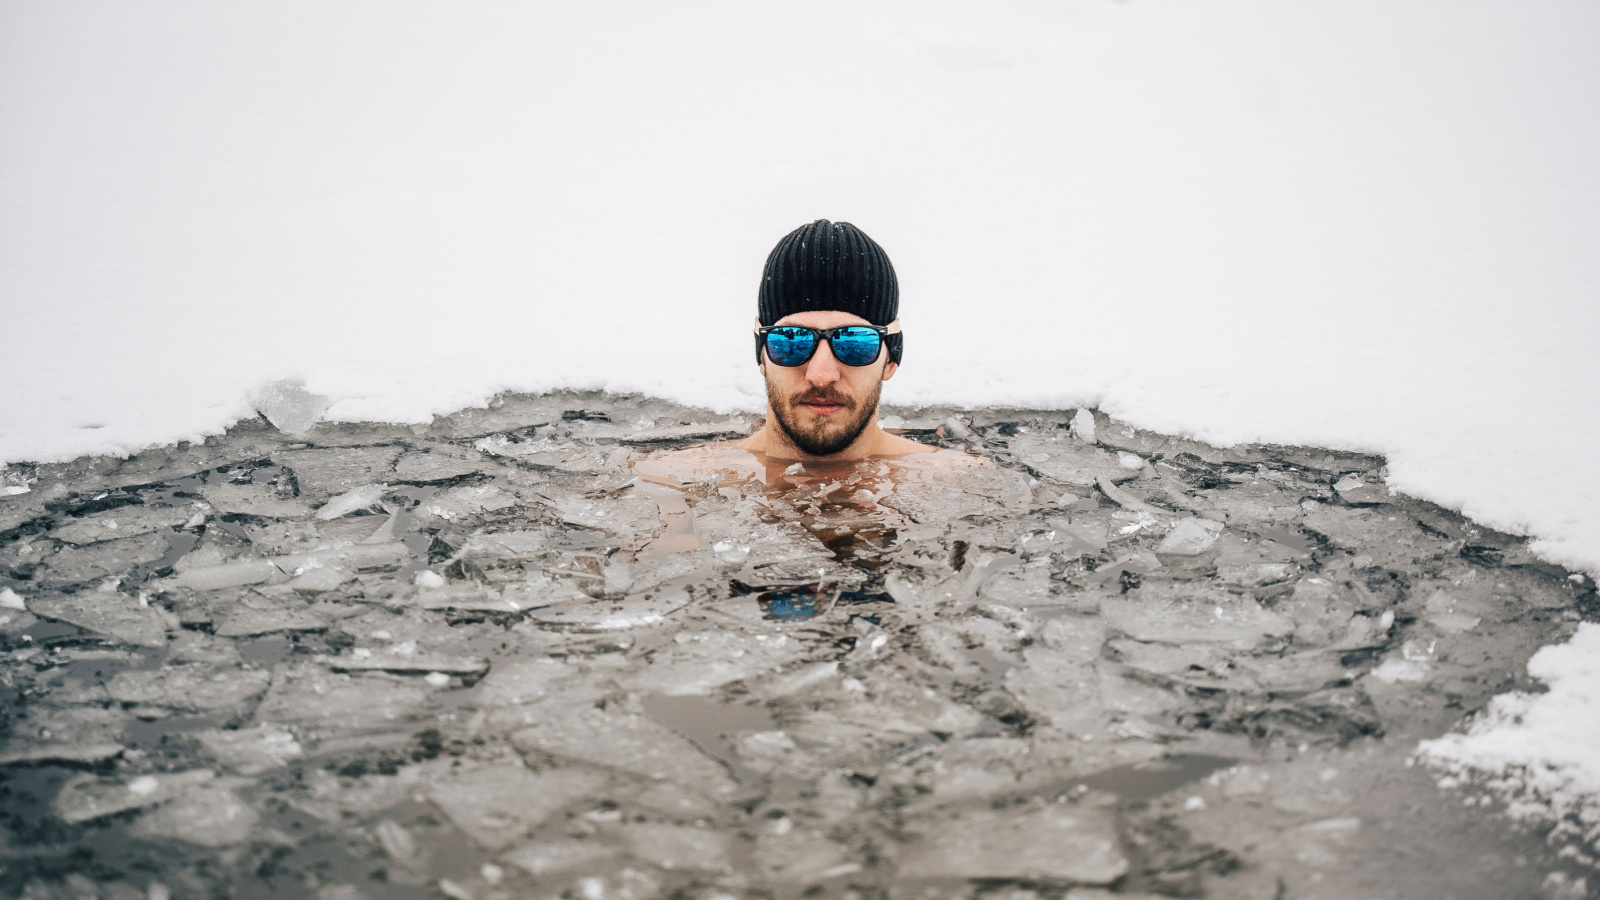 Ice Bath Vs. Cold Shower — Which Is Better for Strength Athletes?